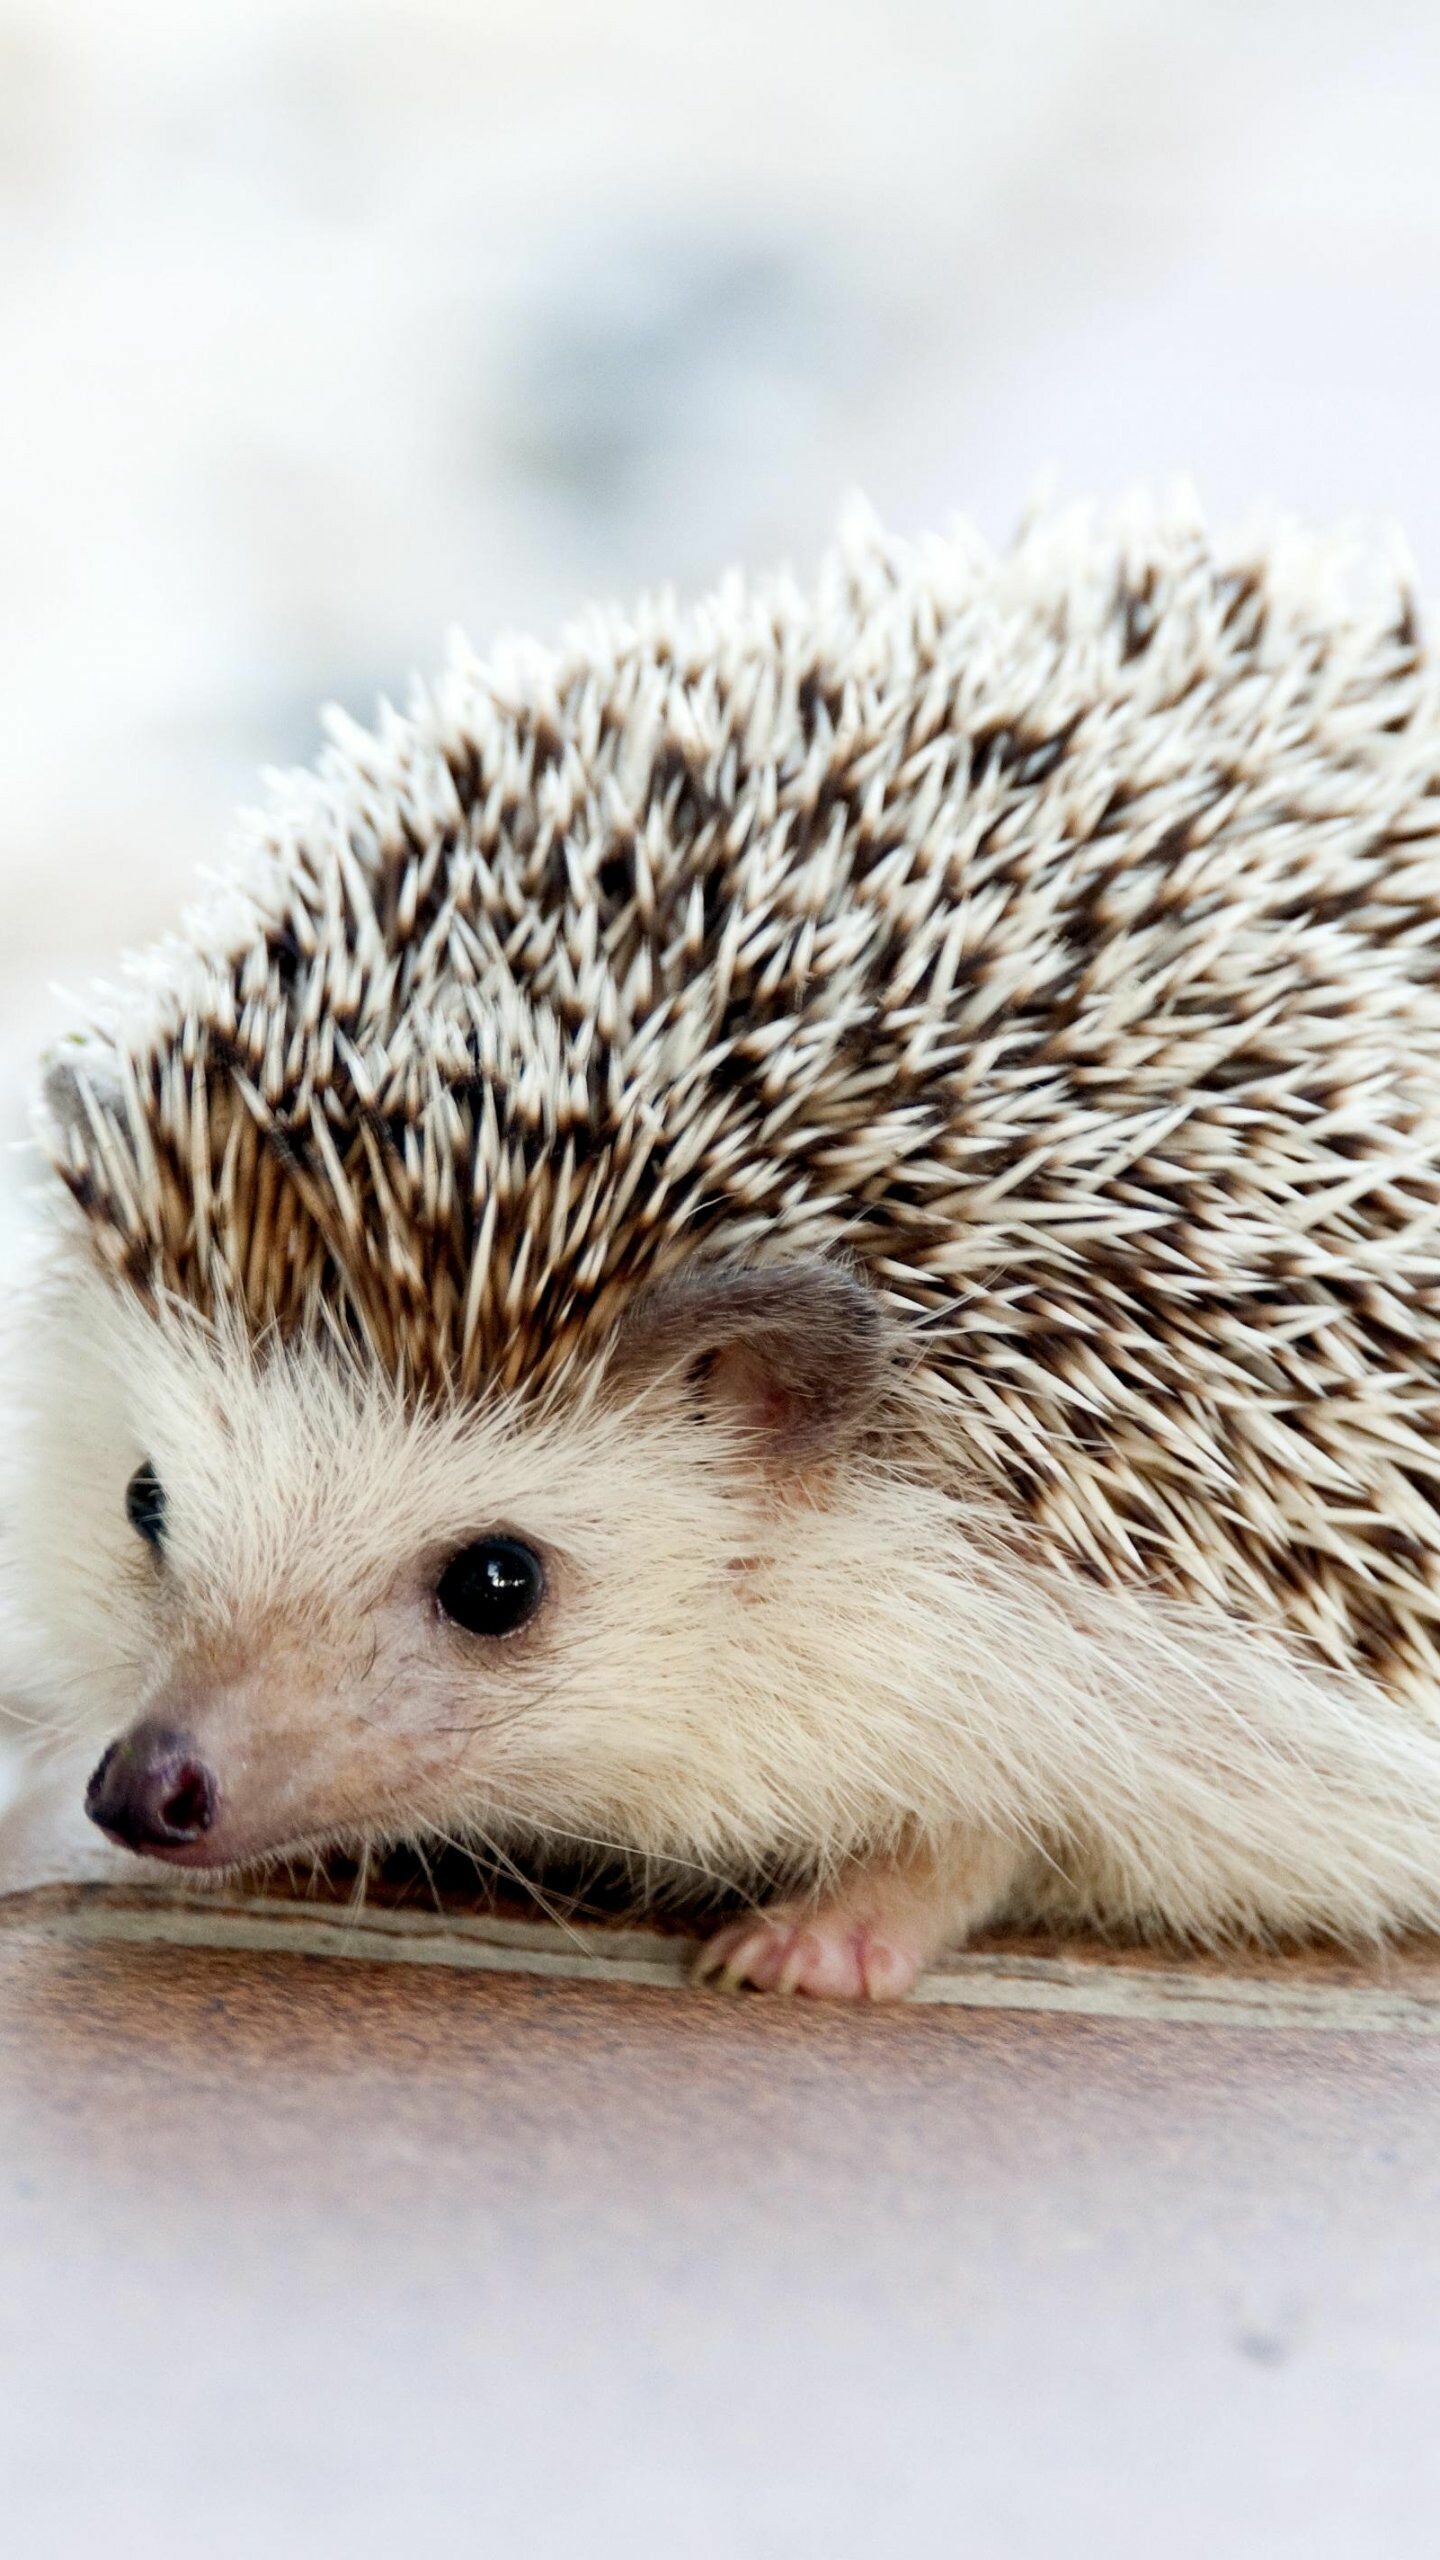 Hedgehog: A spiny mammal that belongs to the family Erinaceidae. 1440x2560 HD Wallpaper.